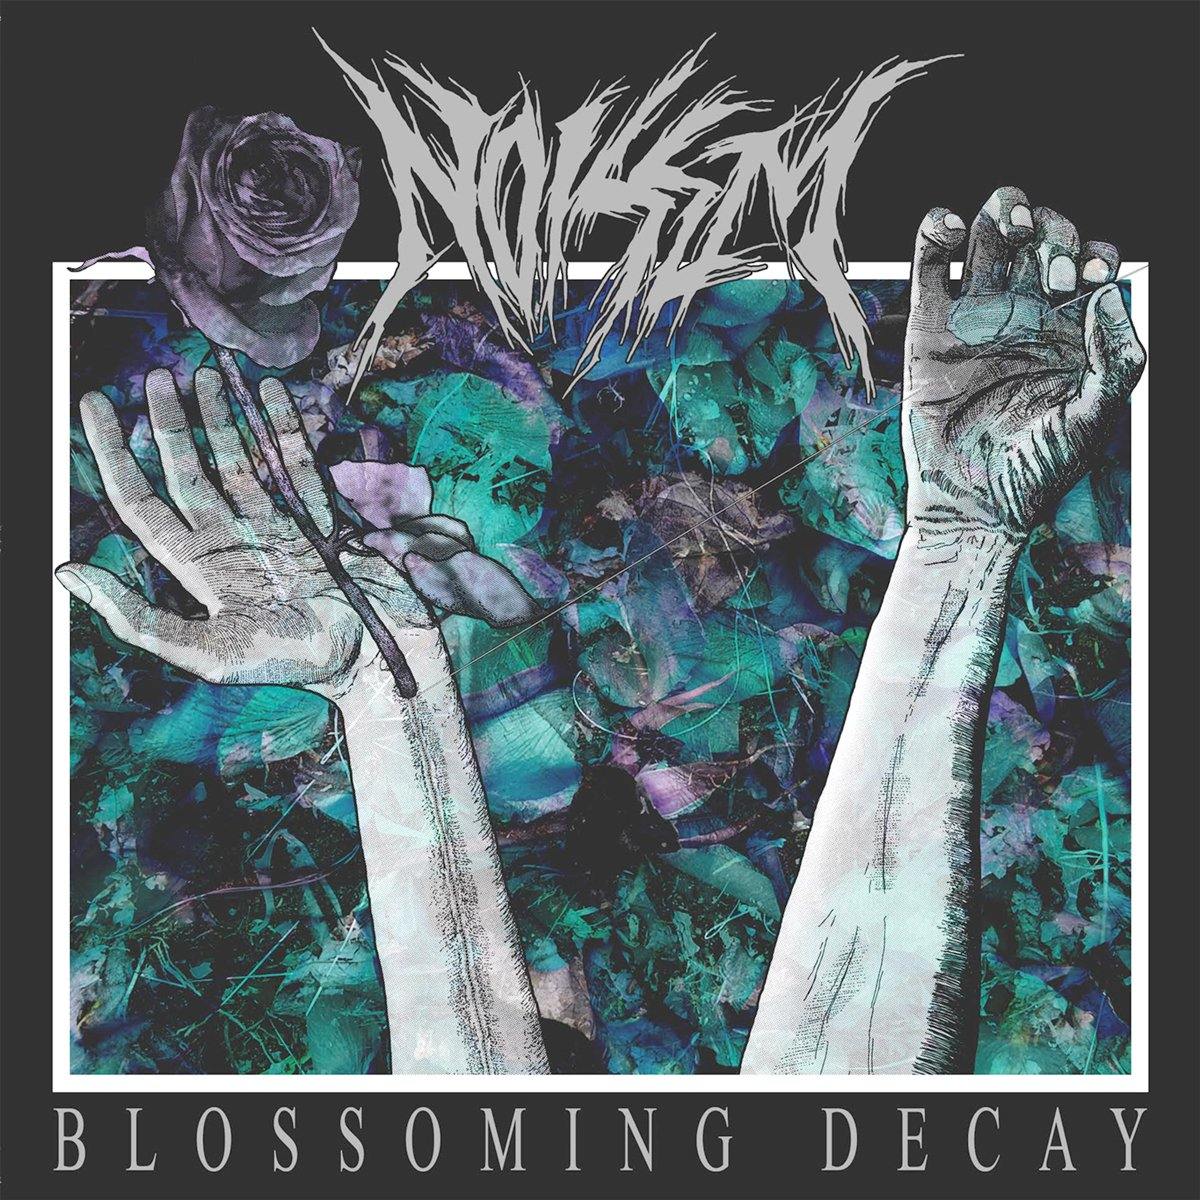 Buy – Noisem "Blossoming Decay" 12" – Band & Music Merch – Cold Cuts Merch